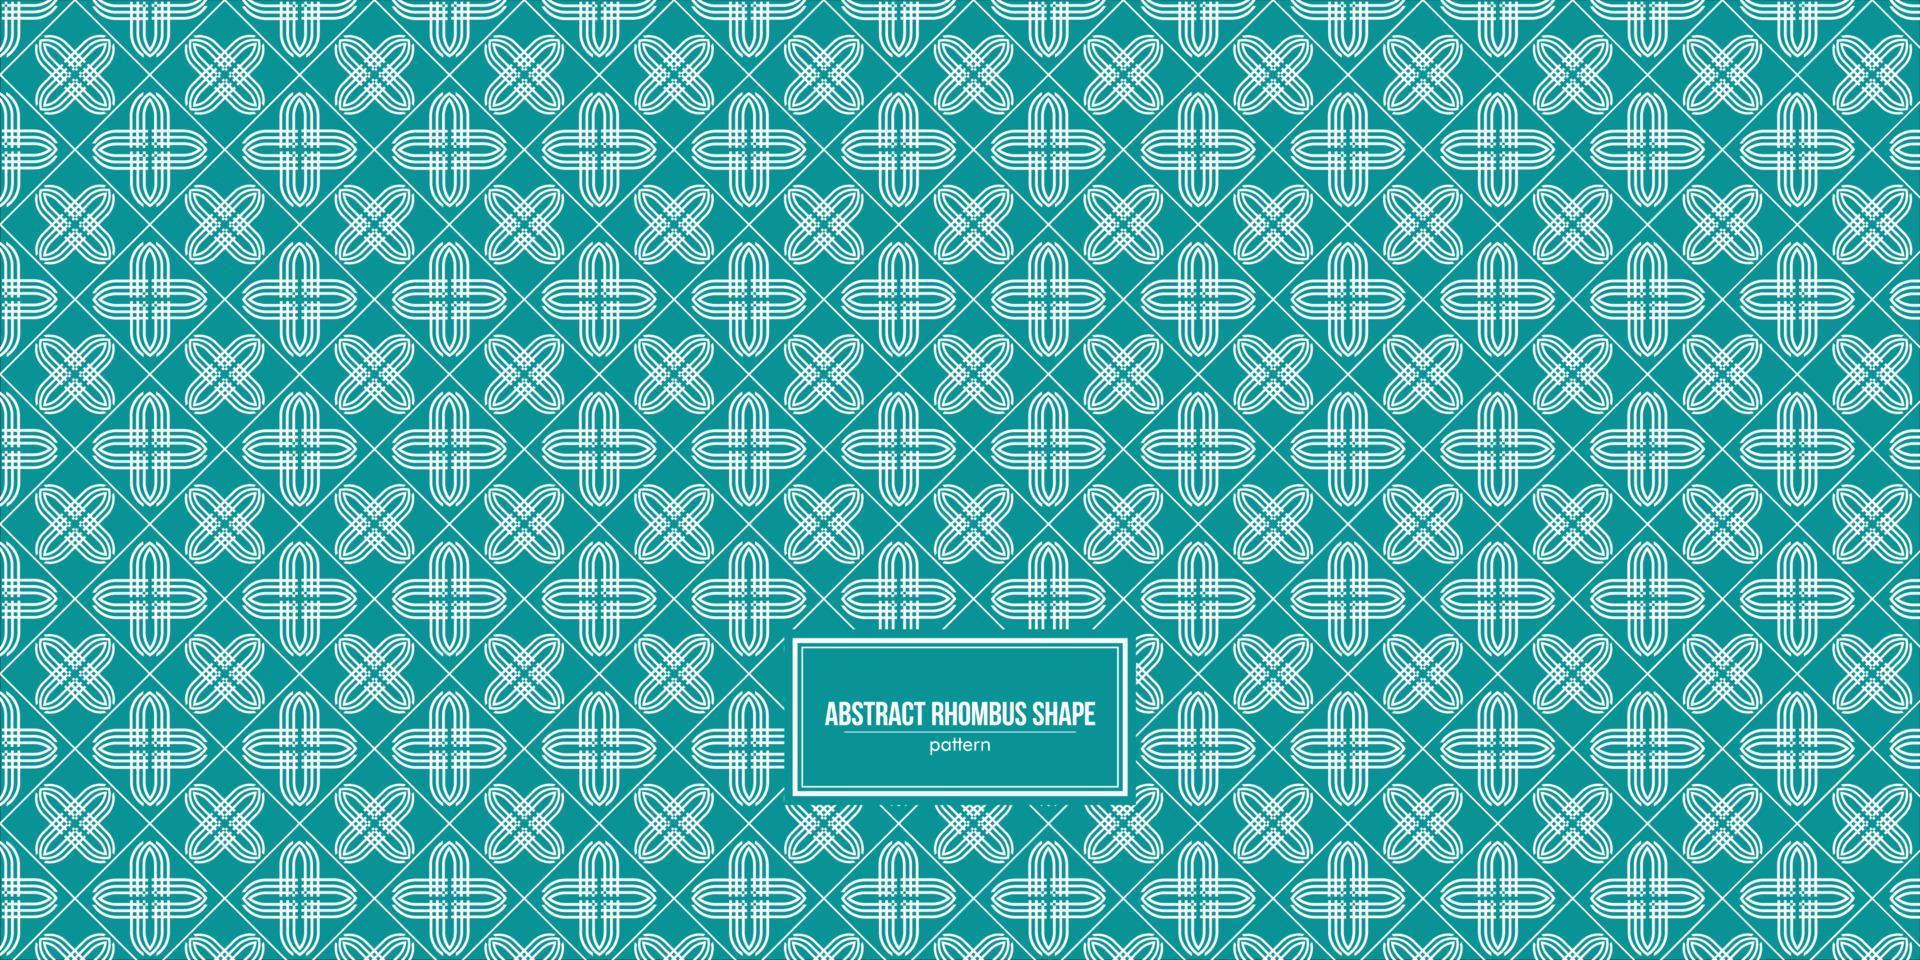 abstract rhombus shape pattern with turquoise pattern vector